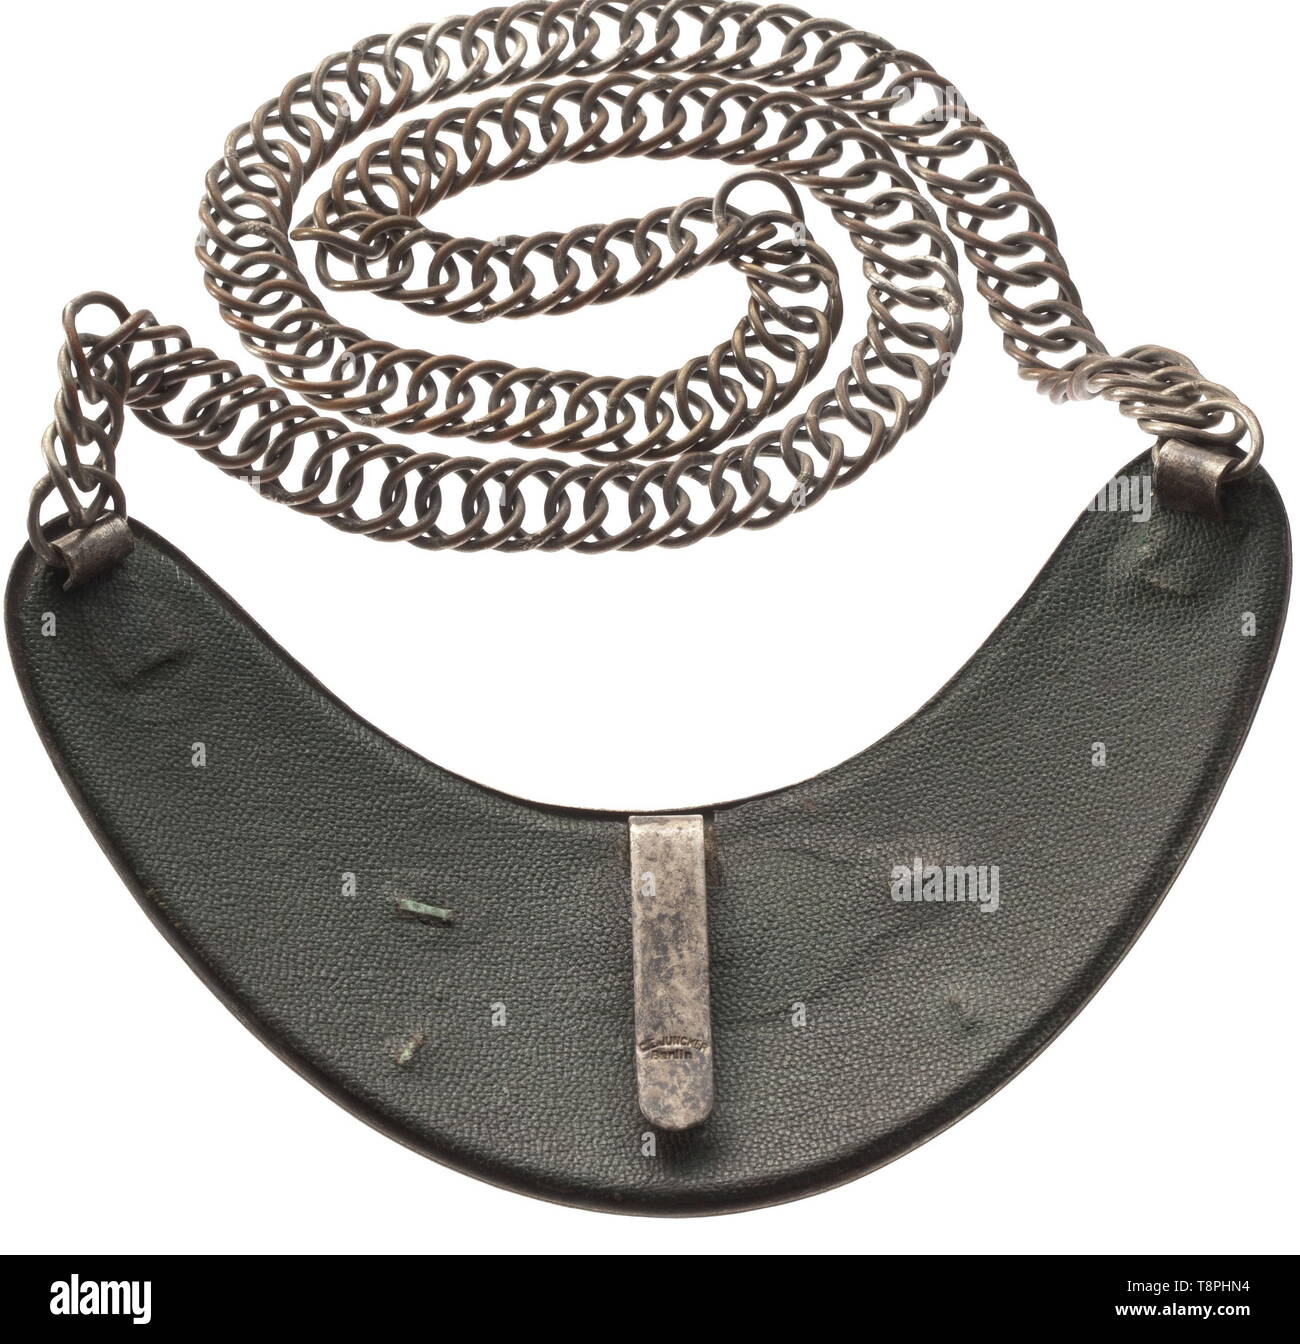 A gorget for members of the Reich Air Traffic Administration 1st model by C.E. Juncker, Berlin Kidney-shaped, silvered shield with gilt appliqué and lettering. Dark green leather liner, the arresting clasp with maker's stamping, nickel plated chain. Darkened. Raised in 1935 as a successor to the air policing service, the Reichs-Luft-Aufsicht (tr. Reich Air Traffic Administration) was officially answerable to the Luftfahrtministerium (tr. Air Ministry) and assumed the regulation and control of airports. historic, historical, 20th century, Additional-Rights-Clearance-Info-Not-Available Stock Photo